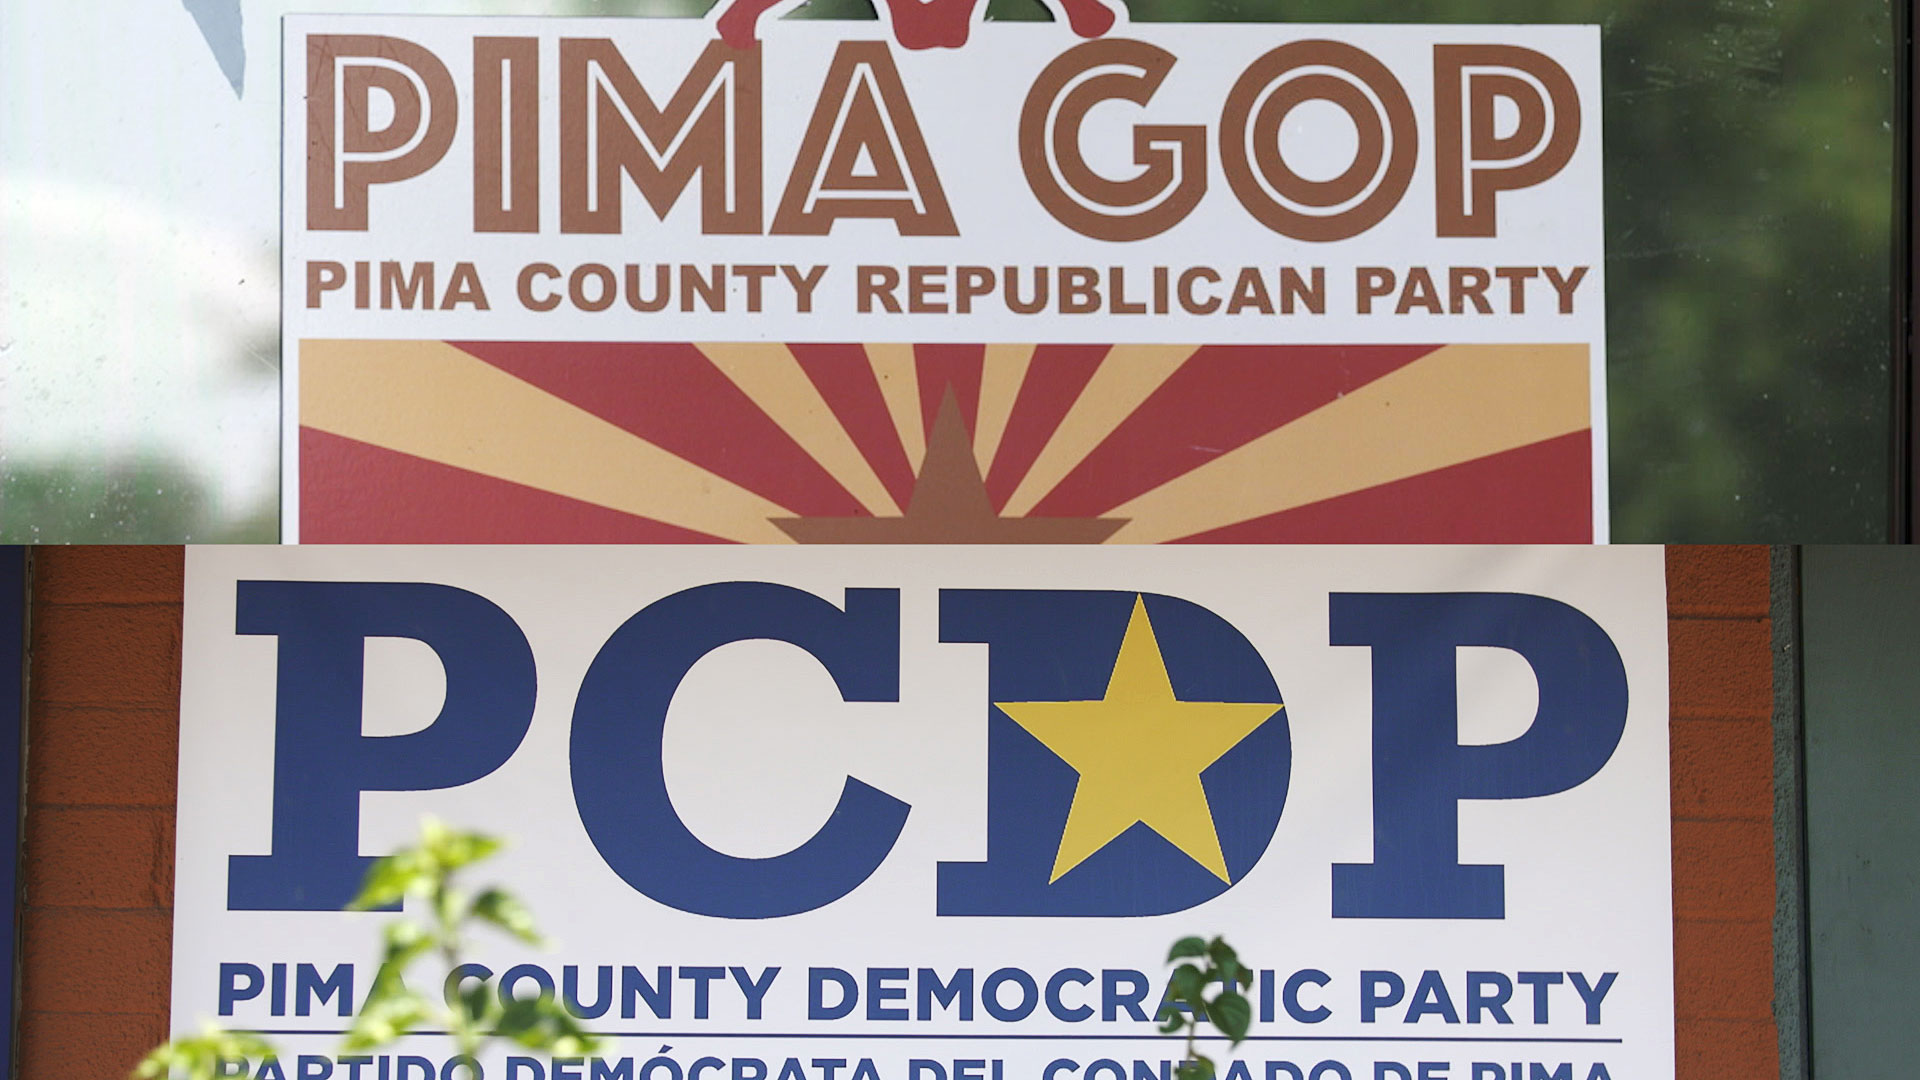 New interest in an obscure political office at the base of Arizona’s GOP